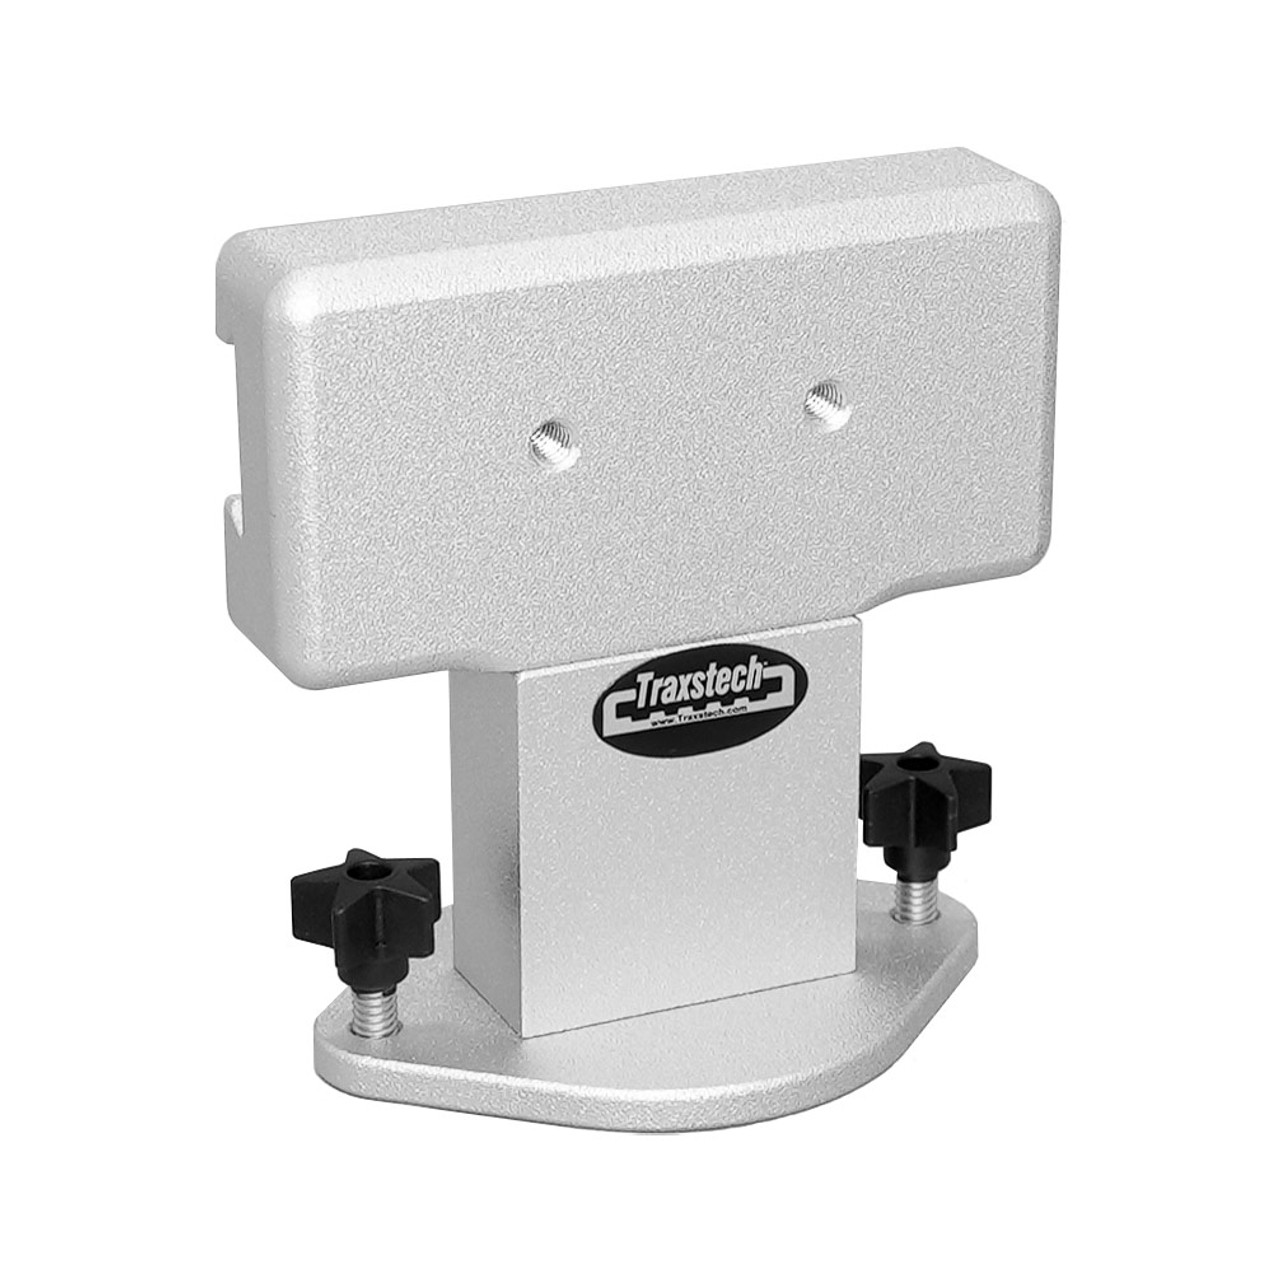 Rod Holder - Deck Mount Plate - CANNON